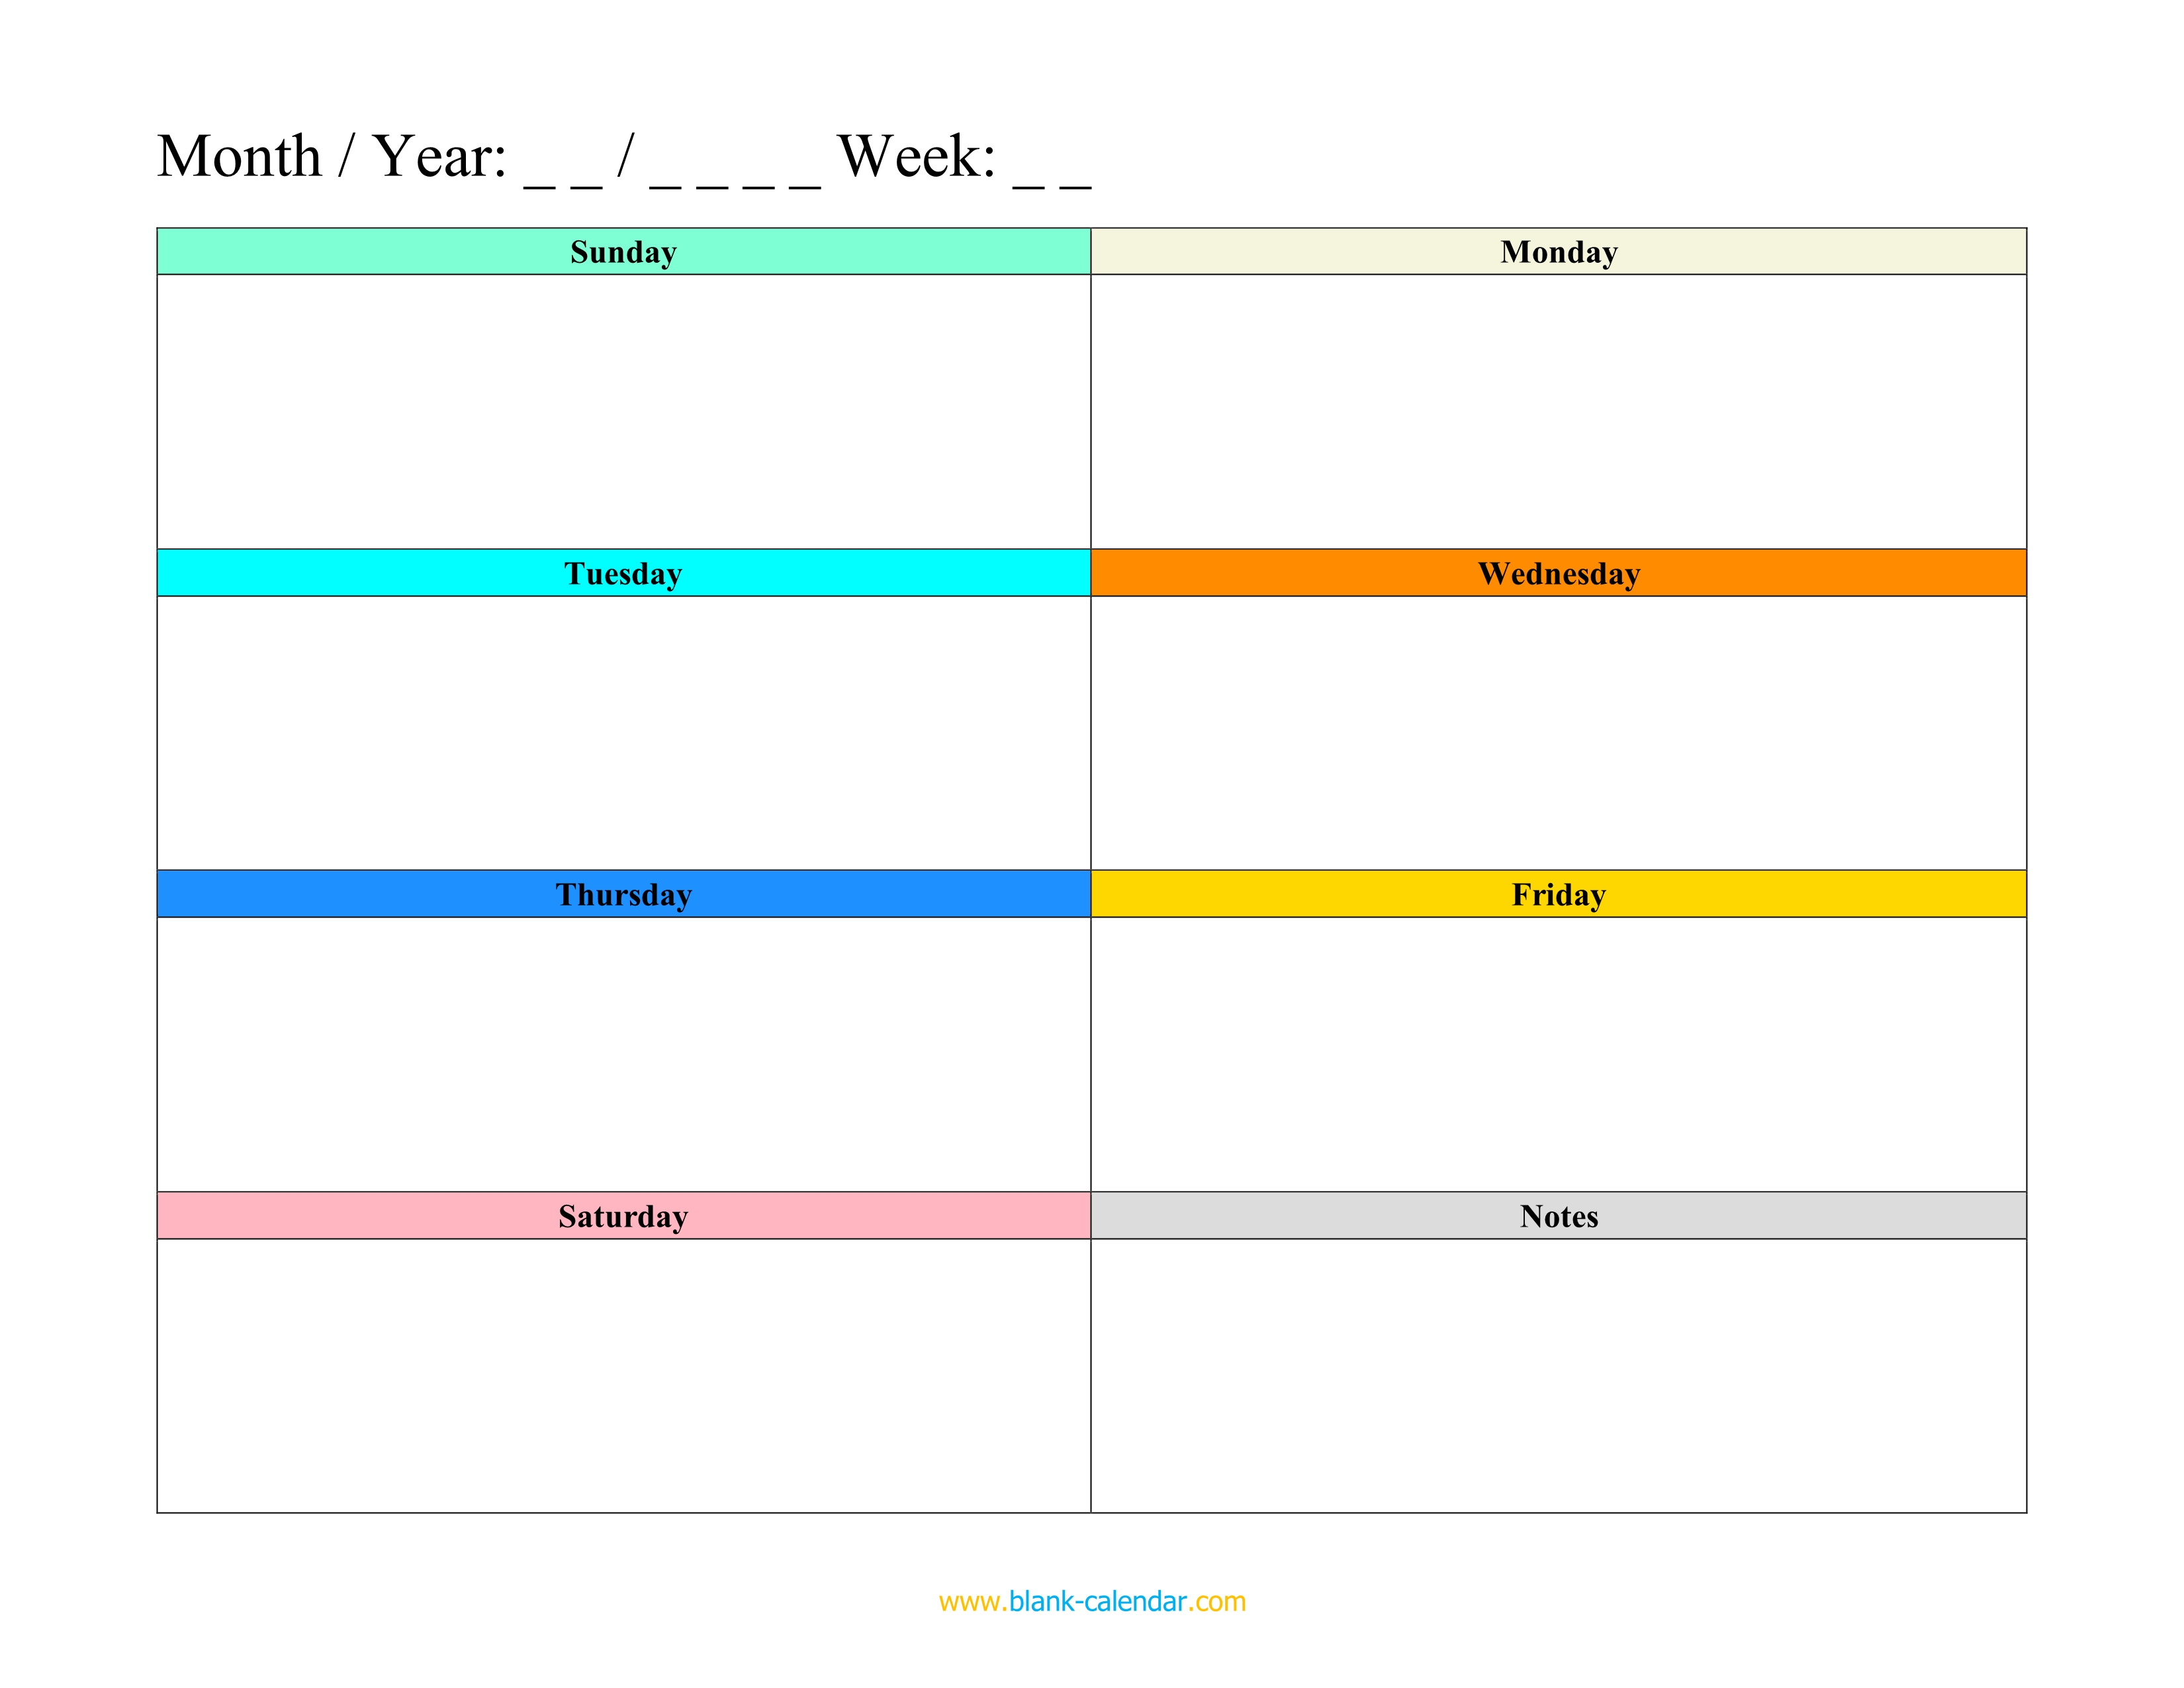 pdf printable daily schedule planner no download